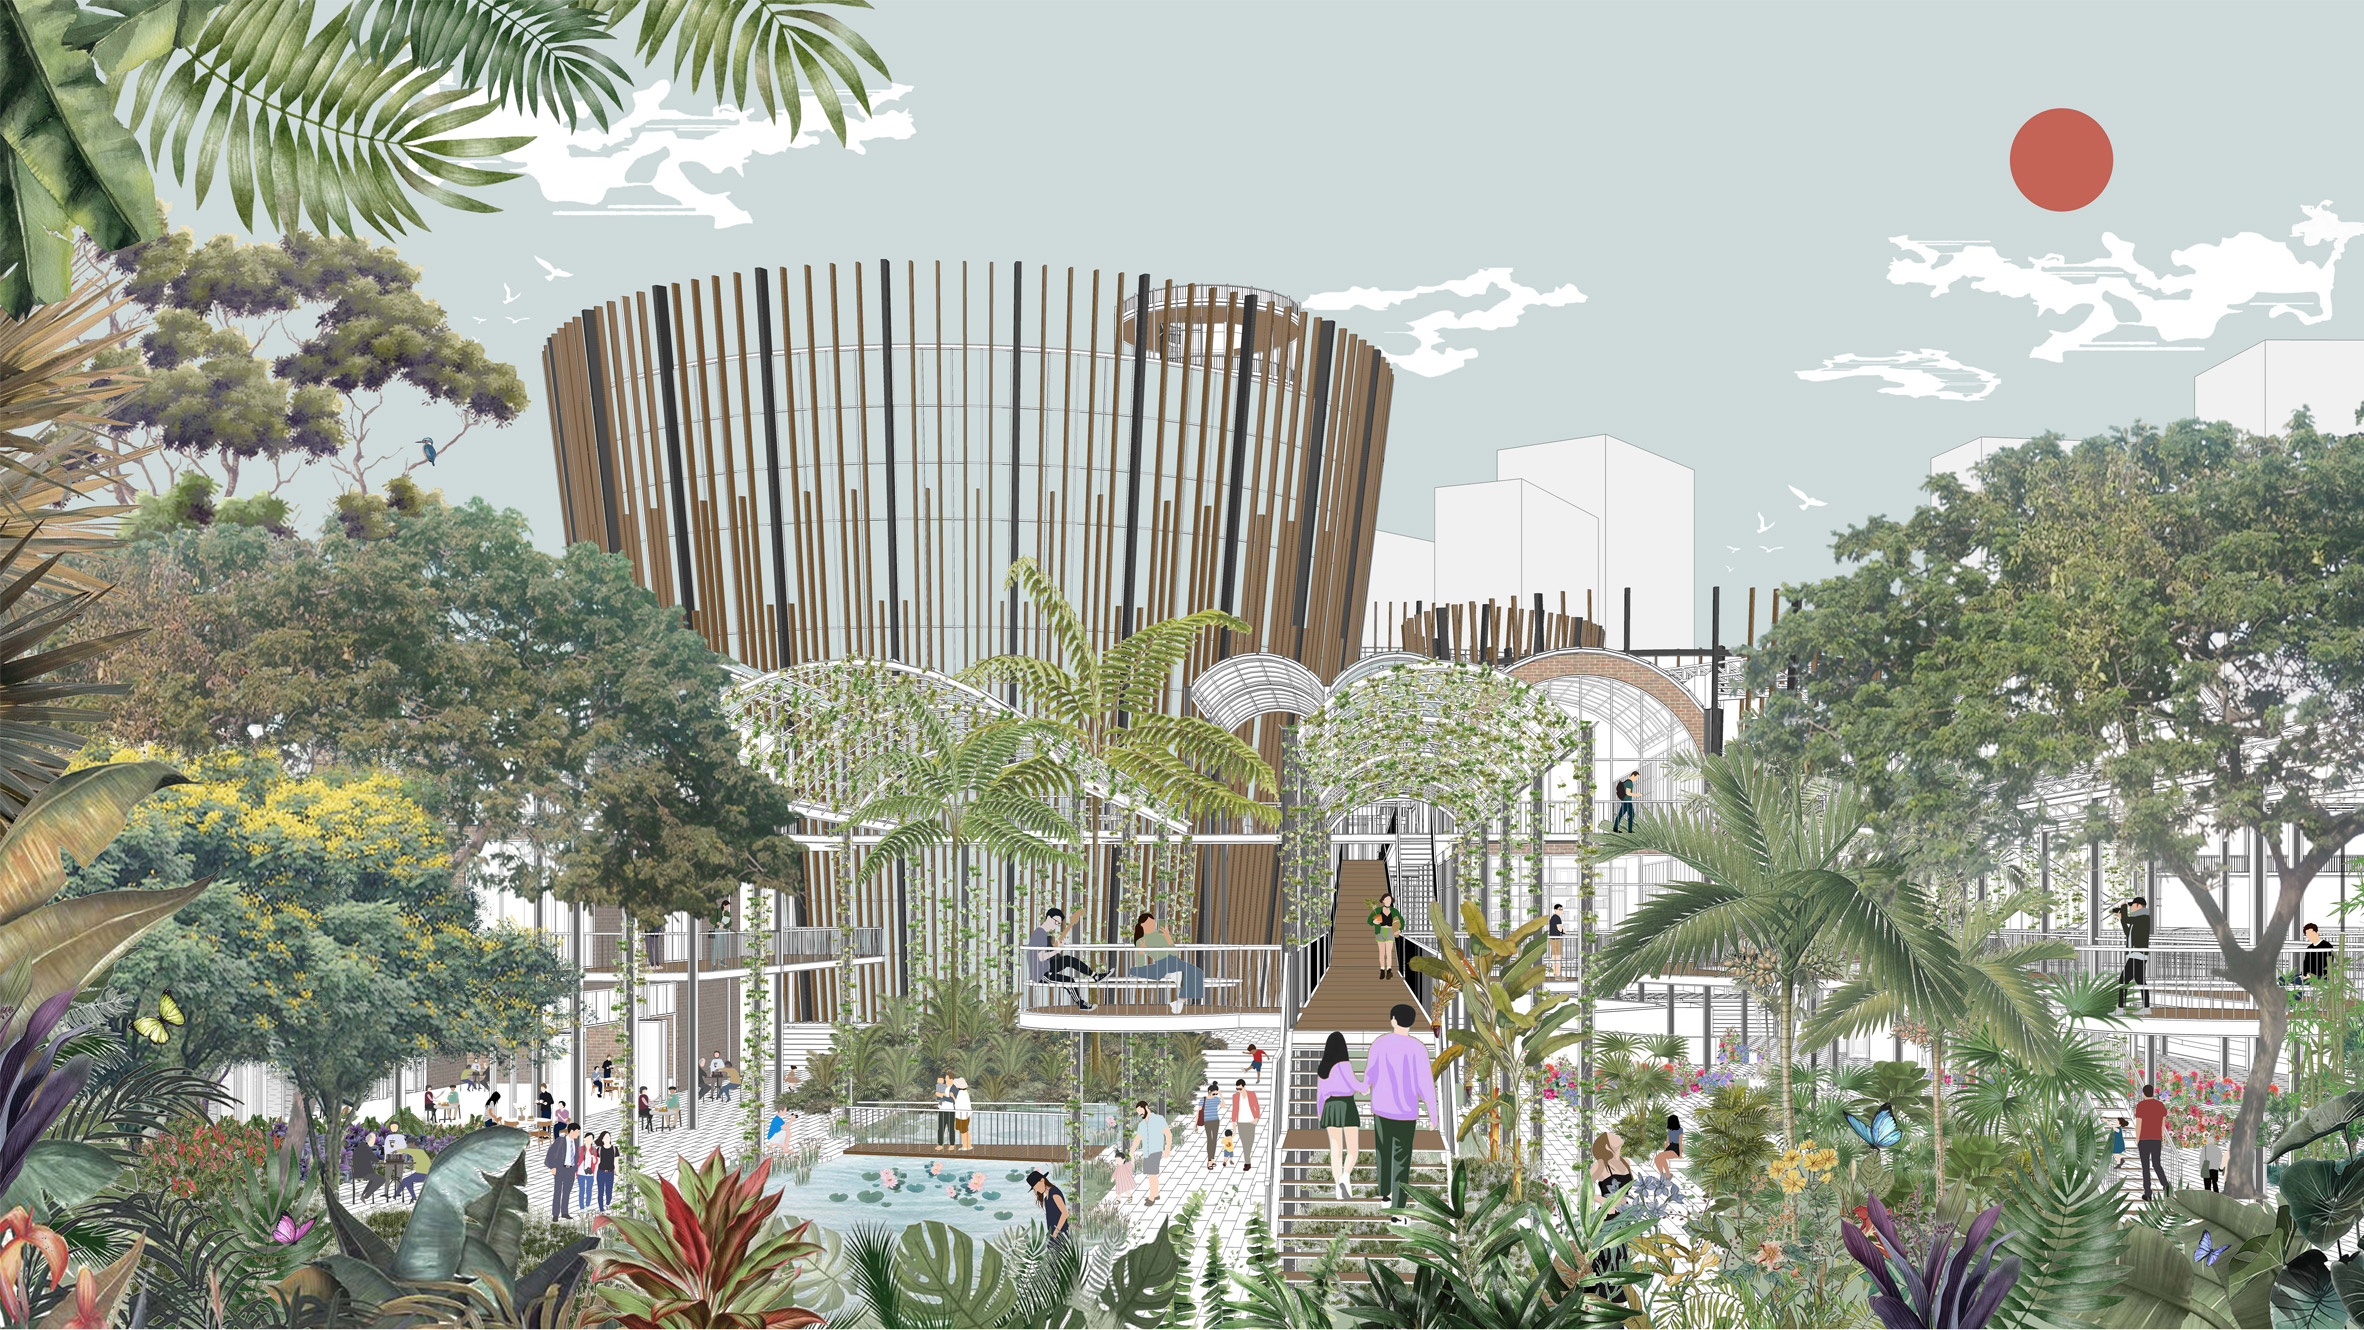 Architectural collage of an outdoor festival with tropical trees presented on Dezeen School Shows